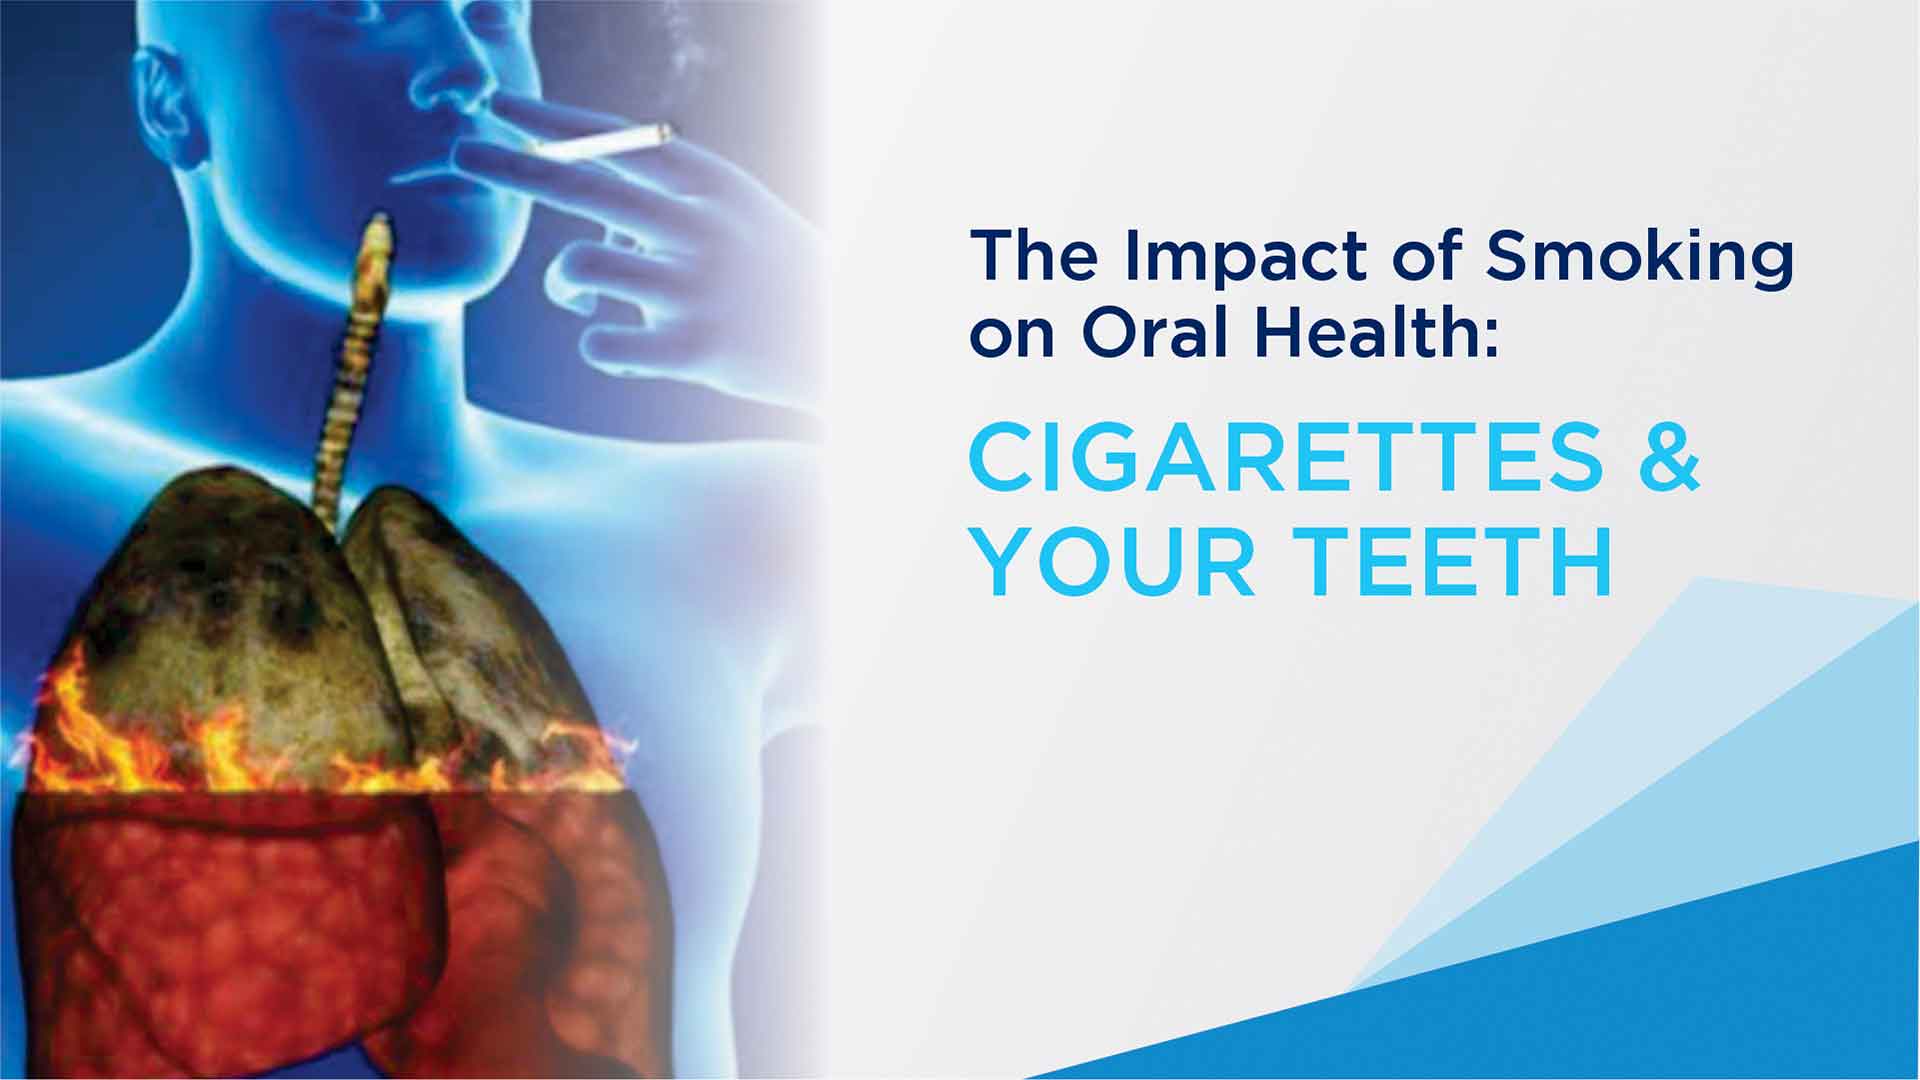 The Impact of Smoking on Oral Health: Cigarettes & Your Teeth